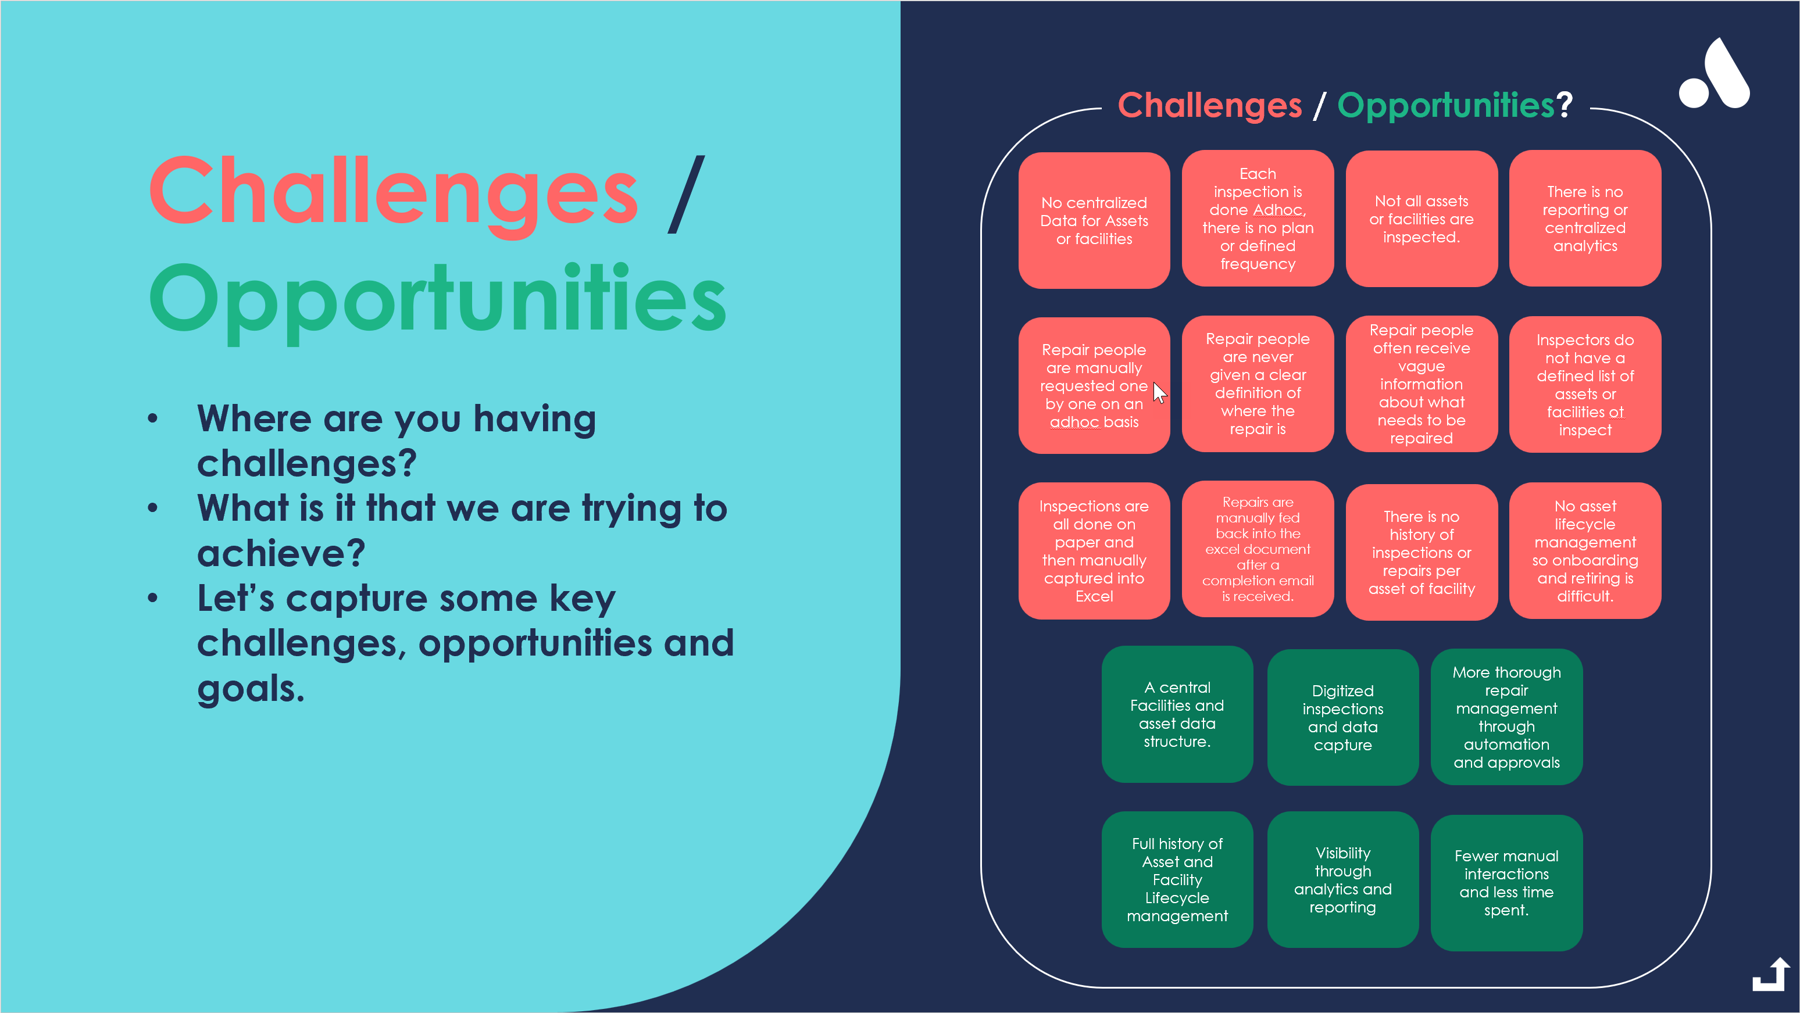 A summarized version of the challenges and opportunities board.